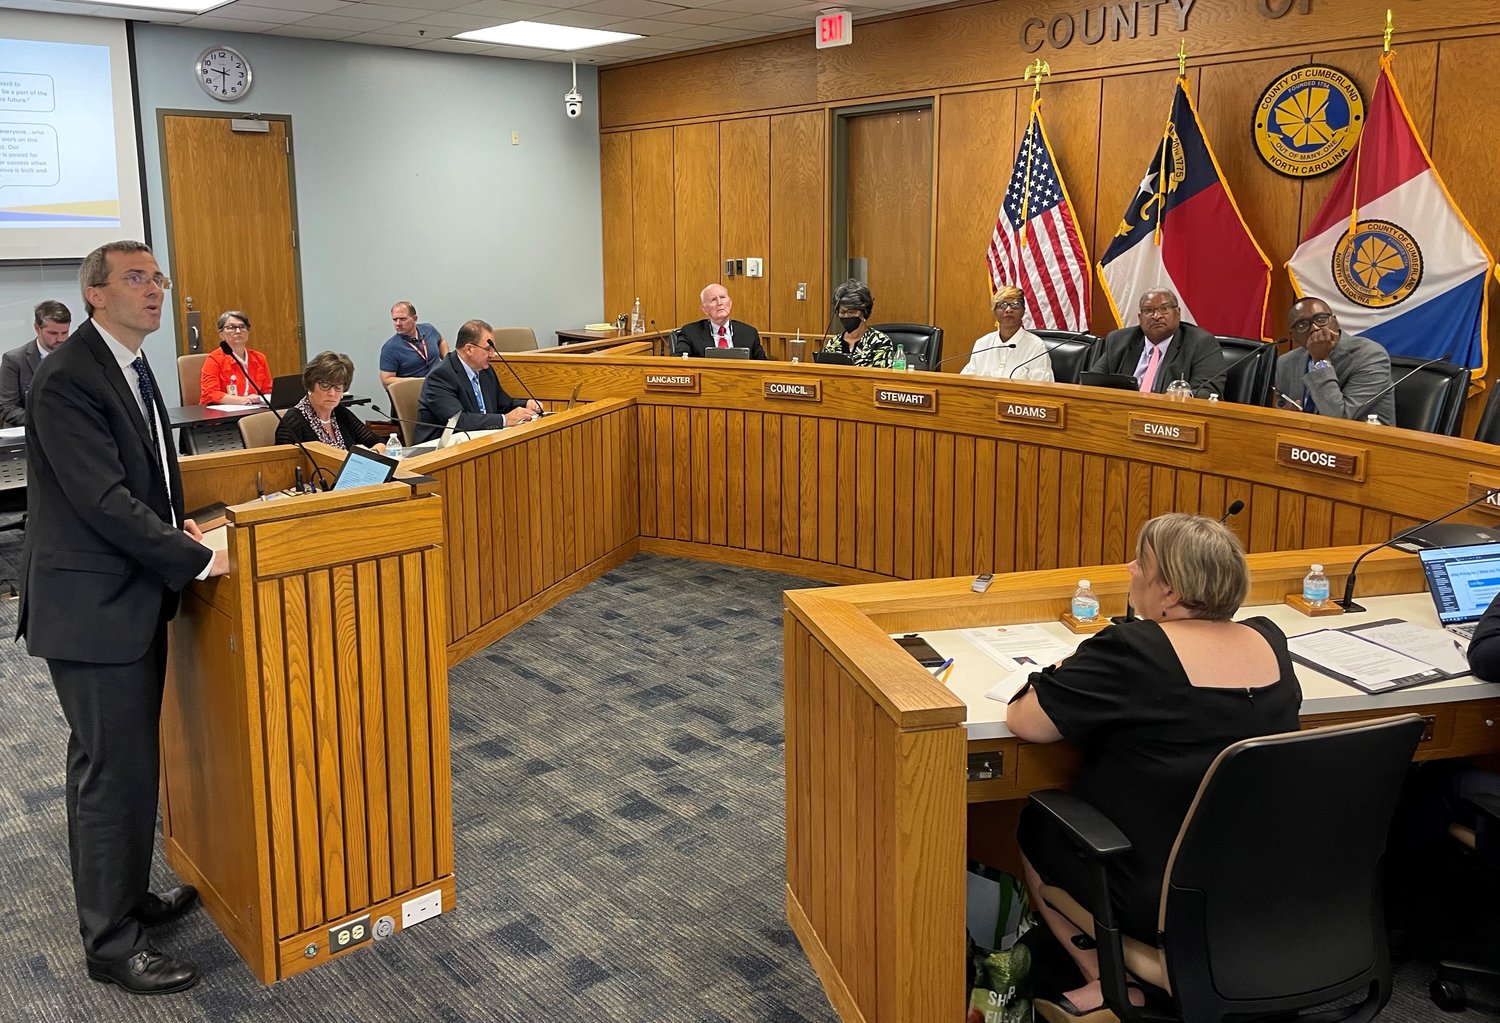 Matt Desilver with MBP Carolinas reviews the 'guiding principles' for the proposed Crown Even Center with the Board of Commissioners on Tuesday.